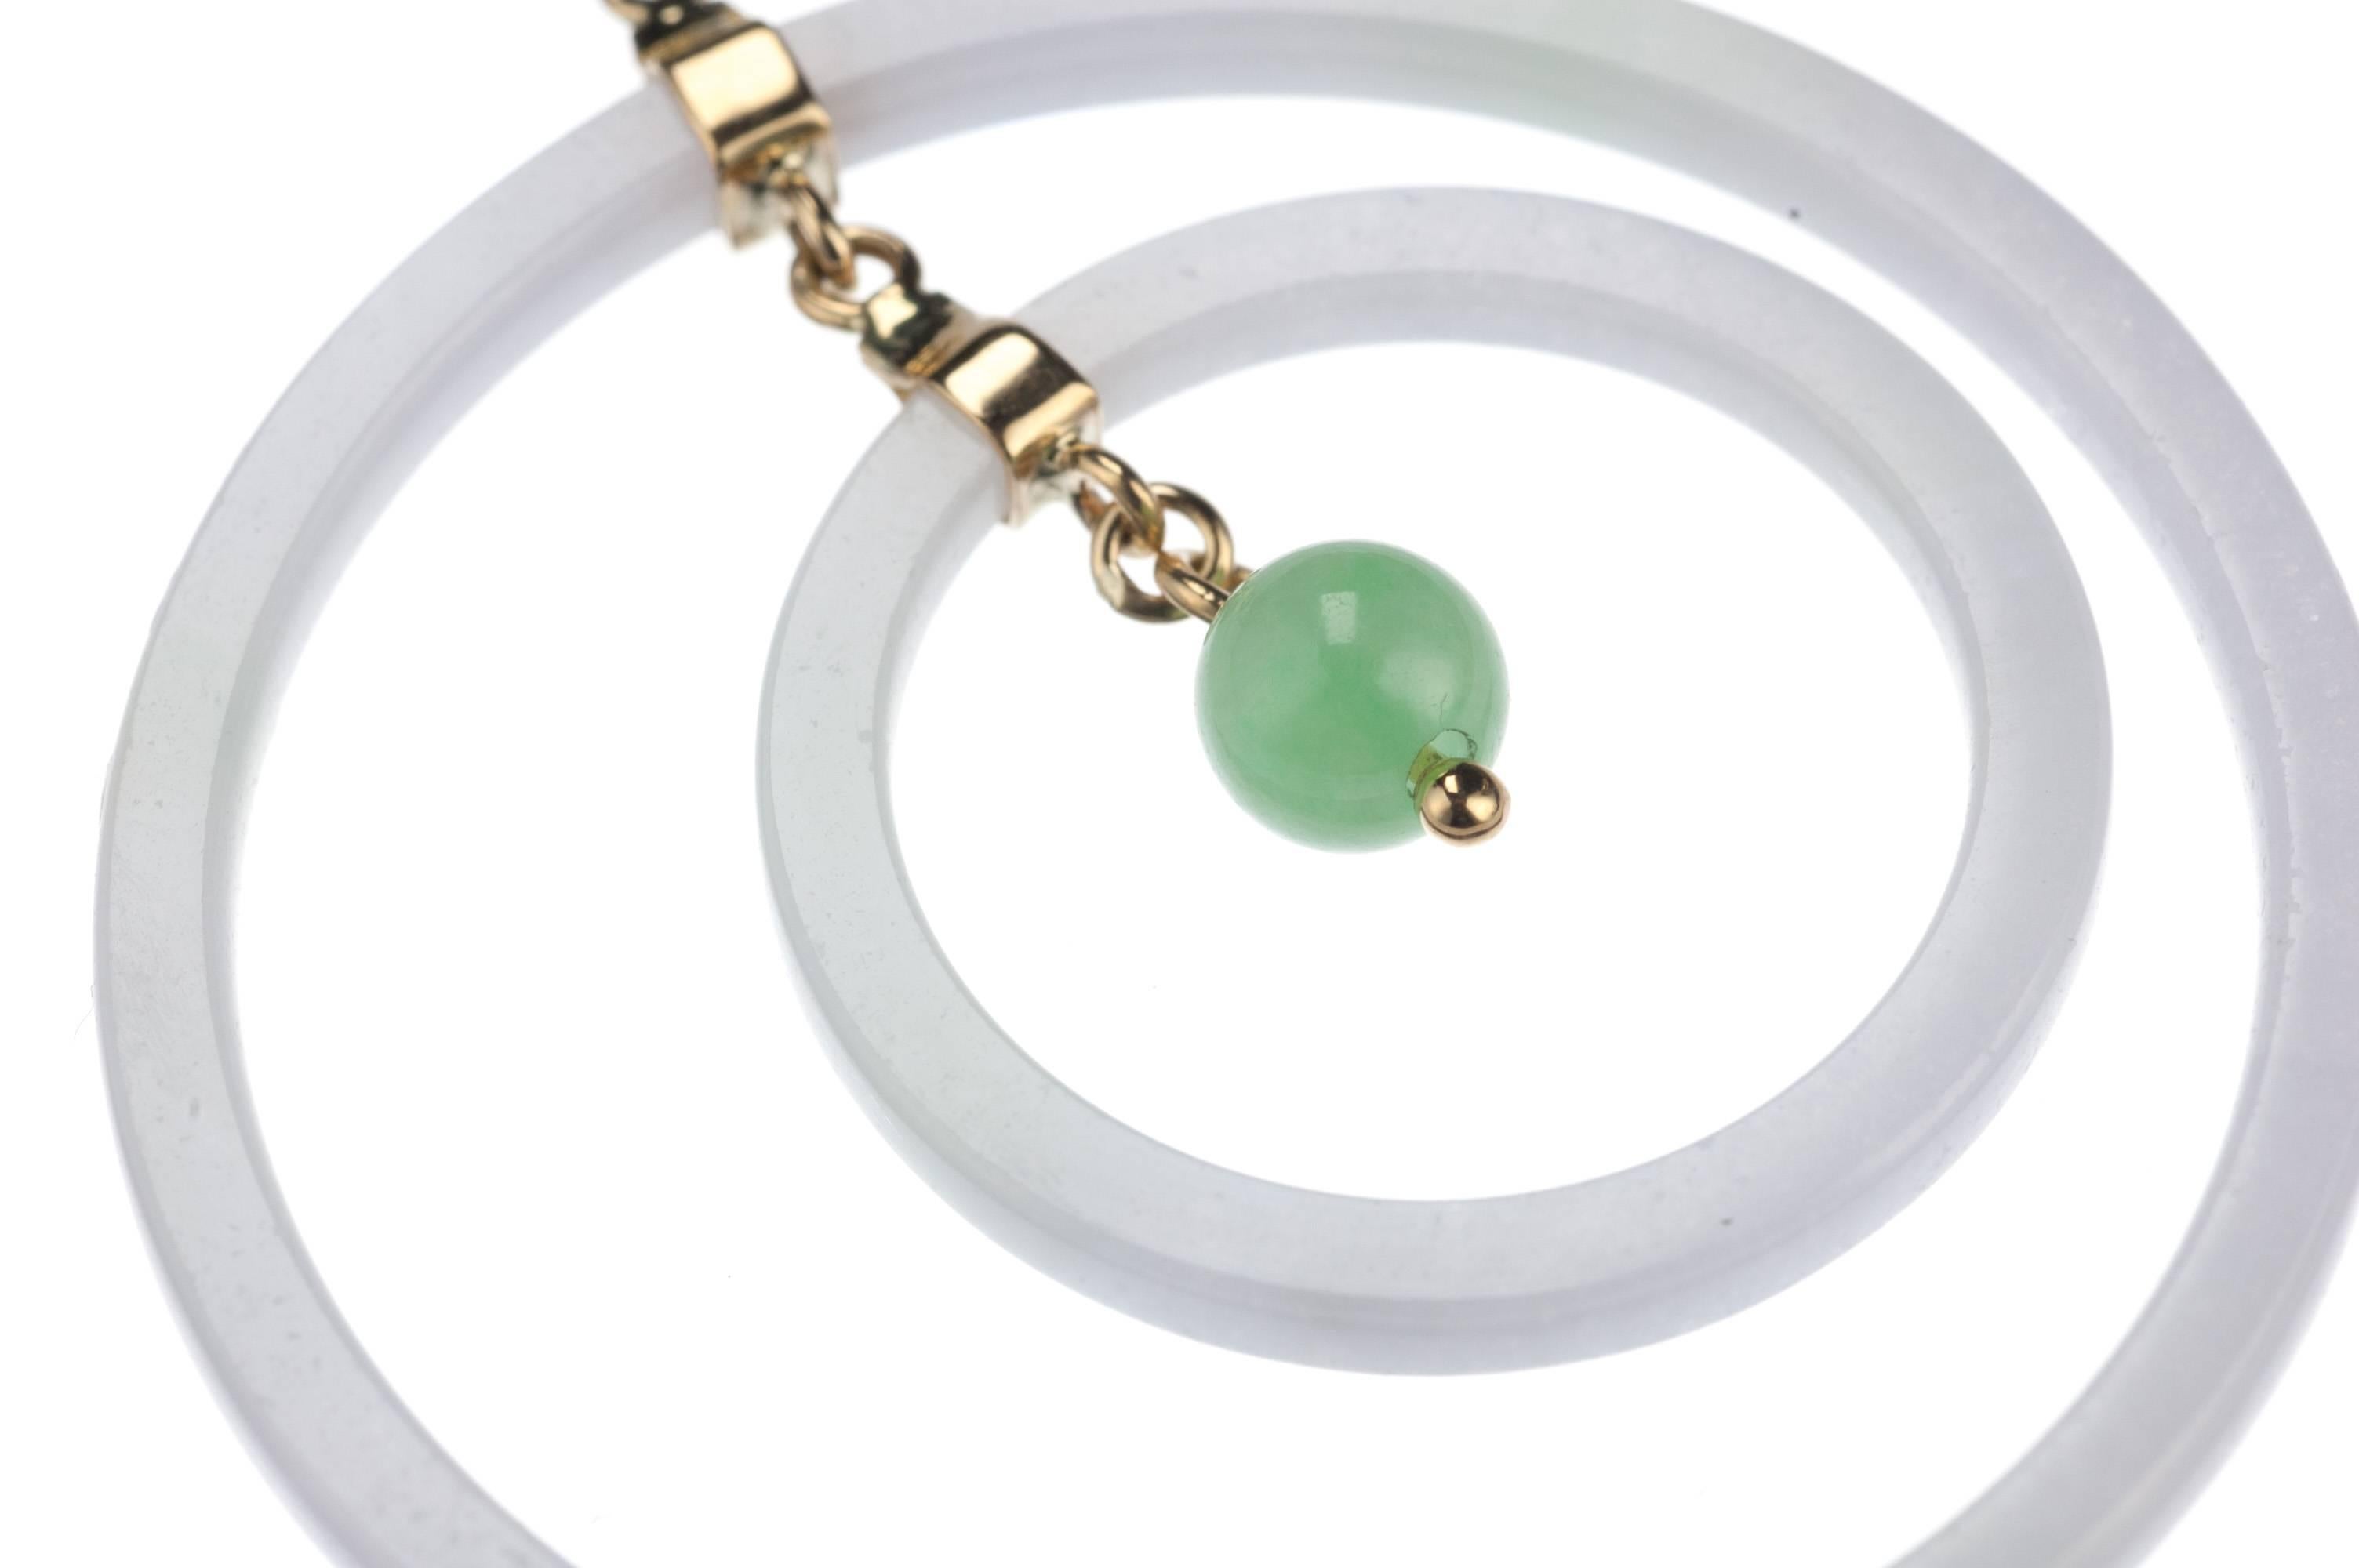 Concentric rings of white jadeite encircle small green jadeite beads suspended from these 18-karat yellow gold drop earrings. Measuring approx. 3” long and 1.5” wide, these earrings make a bold statement without sacrificing their delicate, feminine